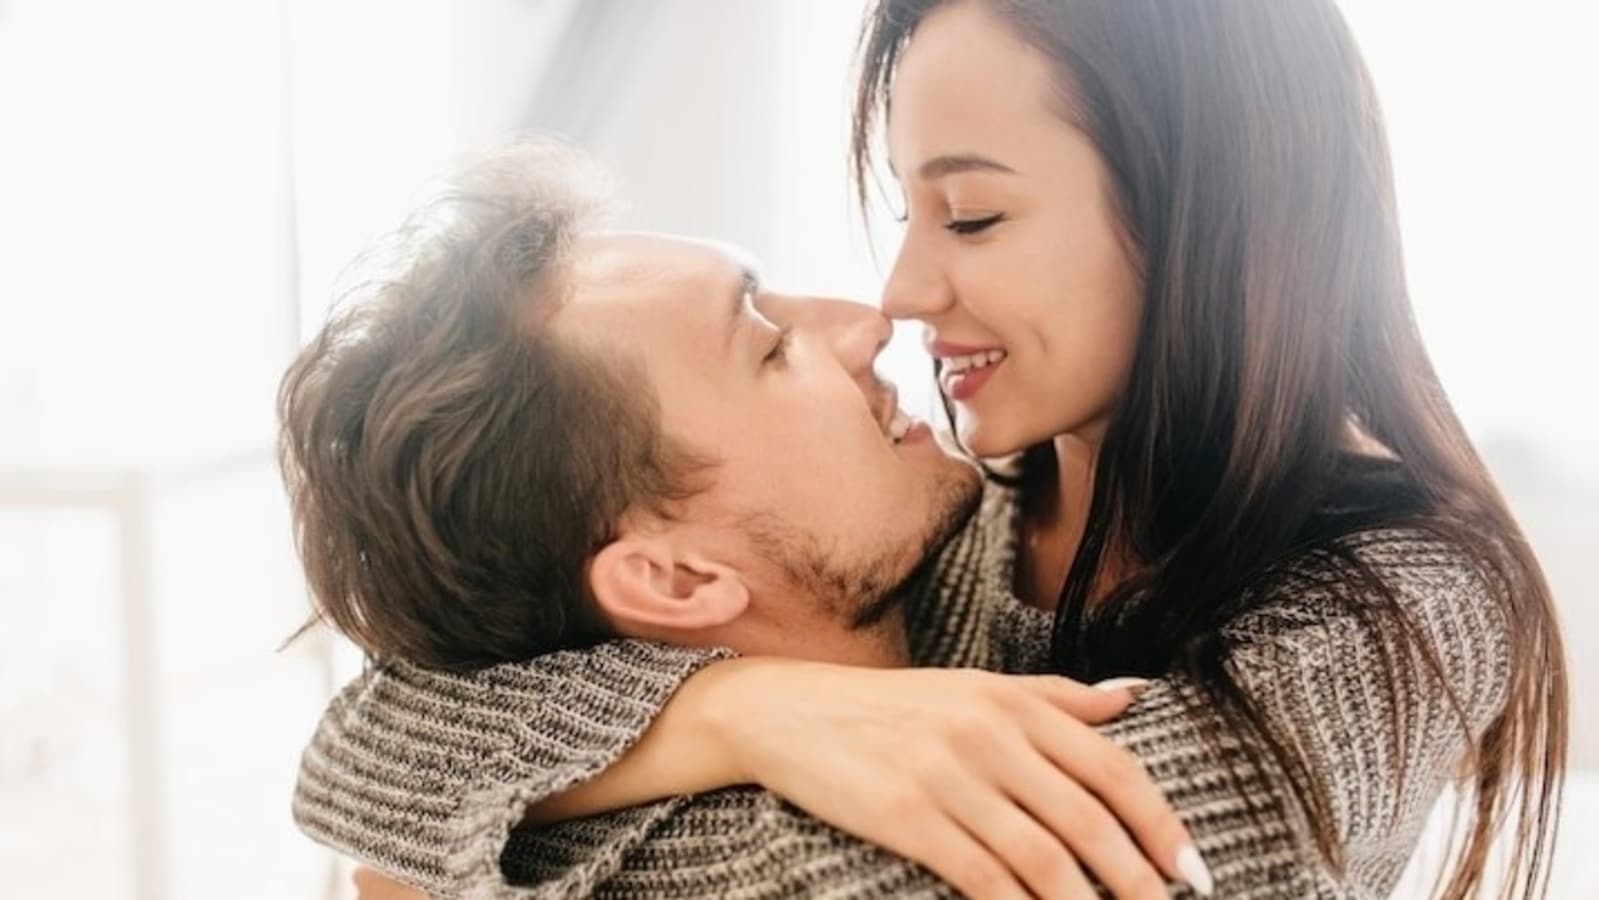 11 Qualities in Men That Women Find Attractive, According to Science